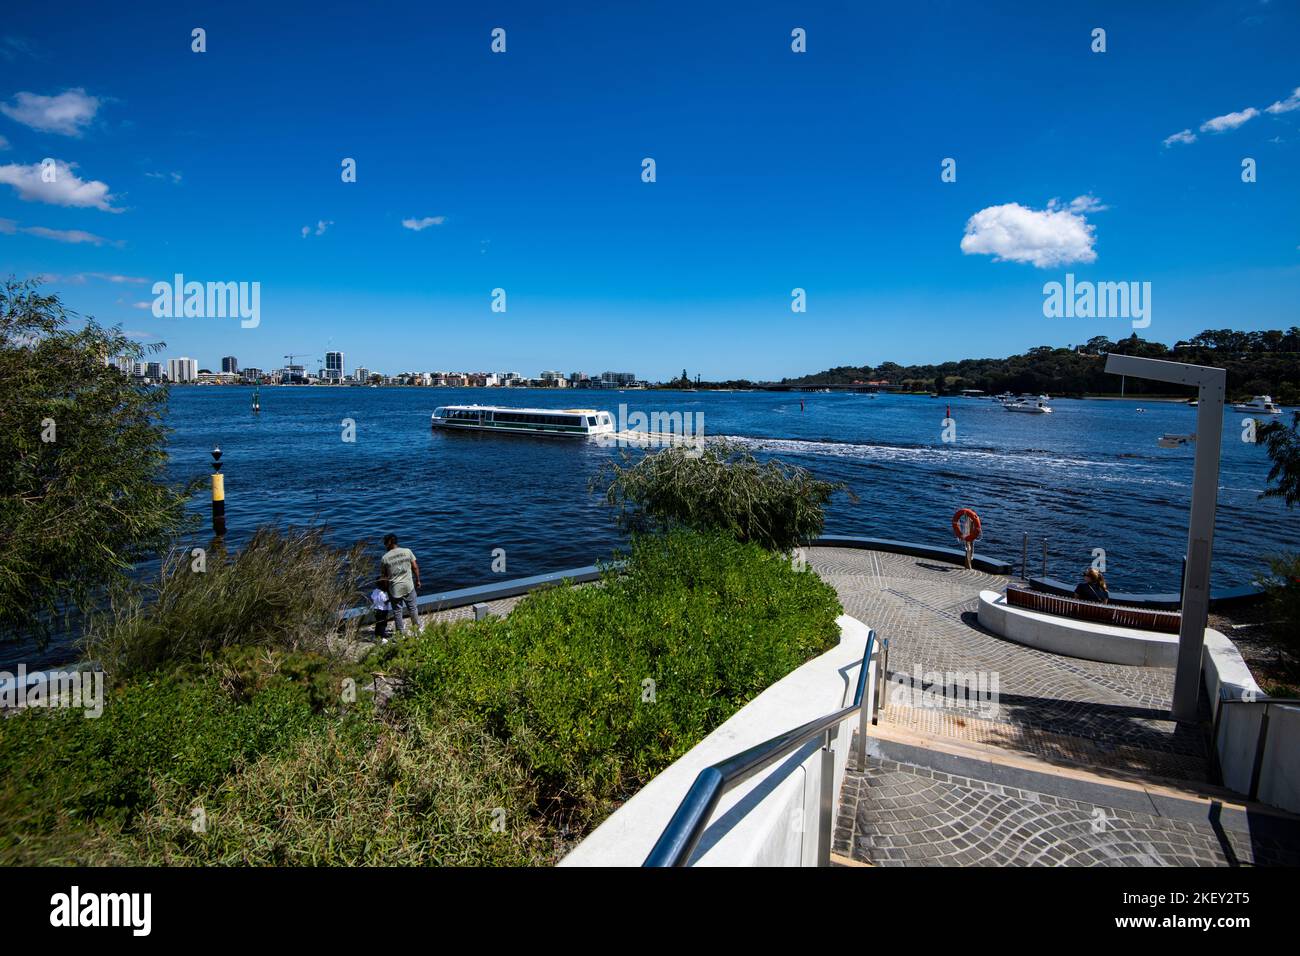 Swan River ferry departing from Queen Elizabeth Quay, Perth, Western Australia. Stock Photo